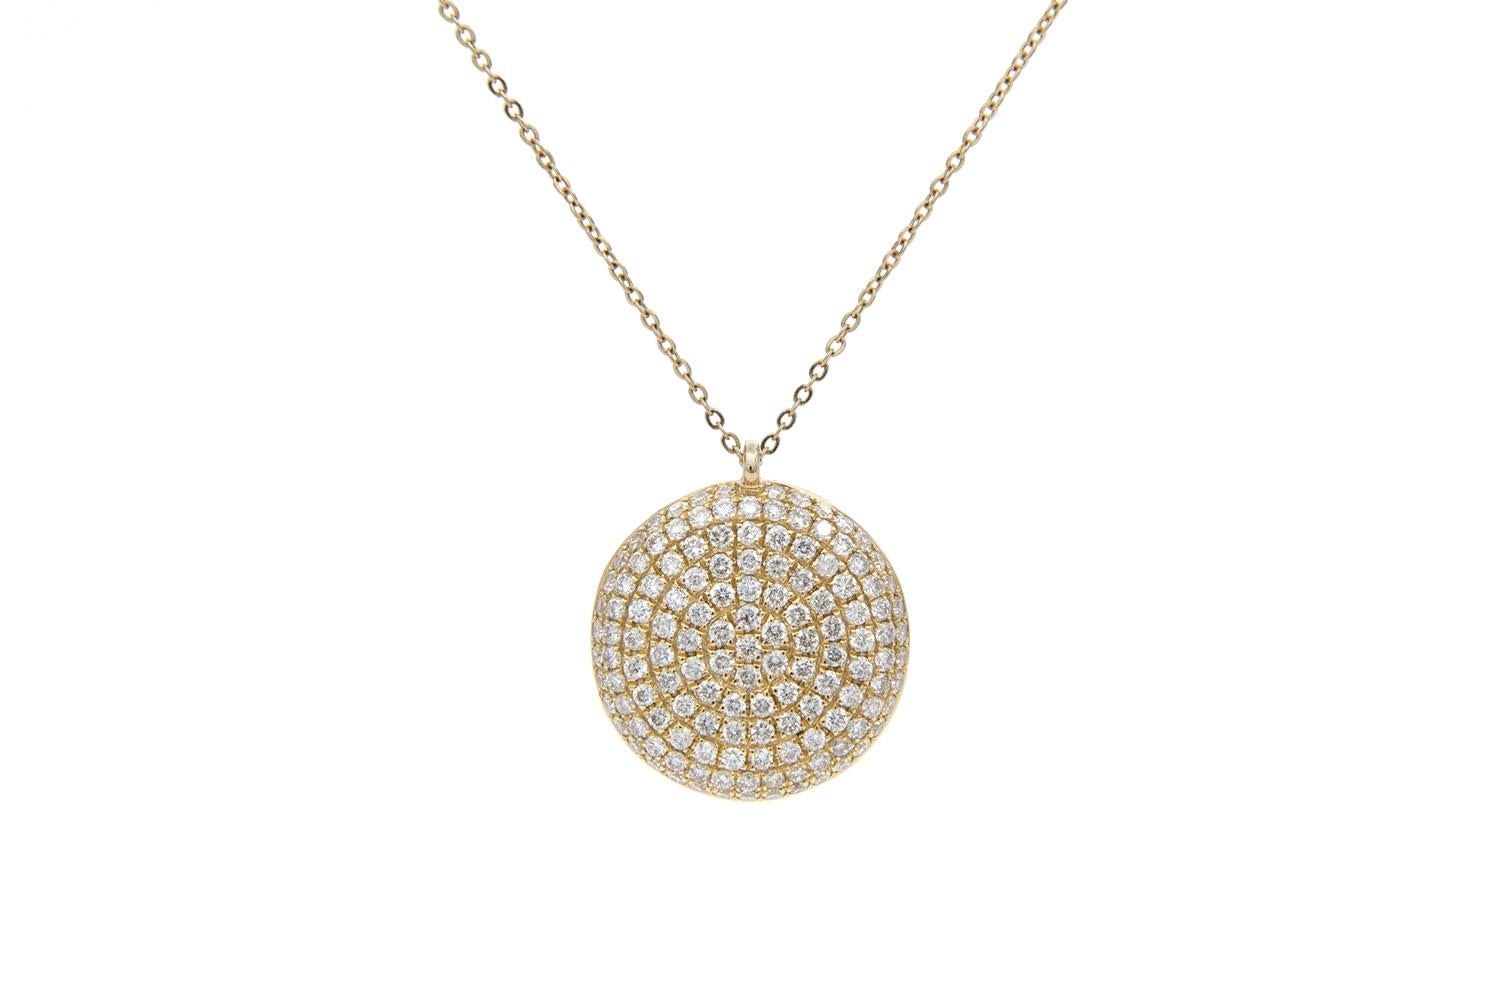 We are pleased to present this 14k Yellow Gold & Micro Pave Diamond Puffy Disc Pendant Necklace. This cute piece features 0.74ctw G-H/VS-SI round brilliant cut diamonds set in a disk shaped pendant on a 14k yellow gold chain. The chain is 18